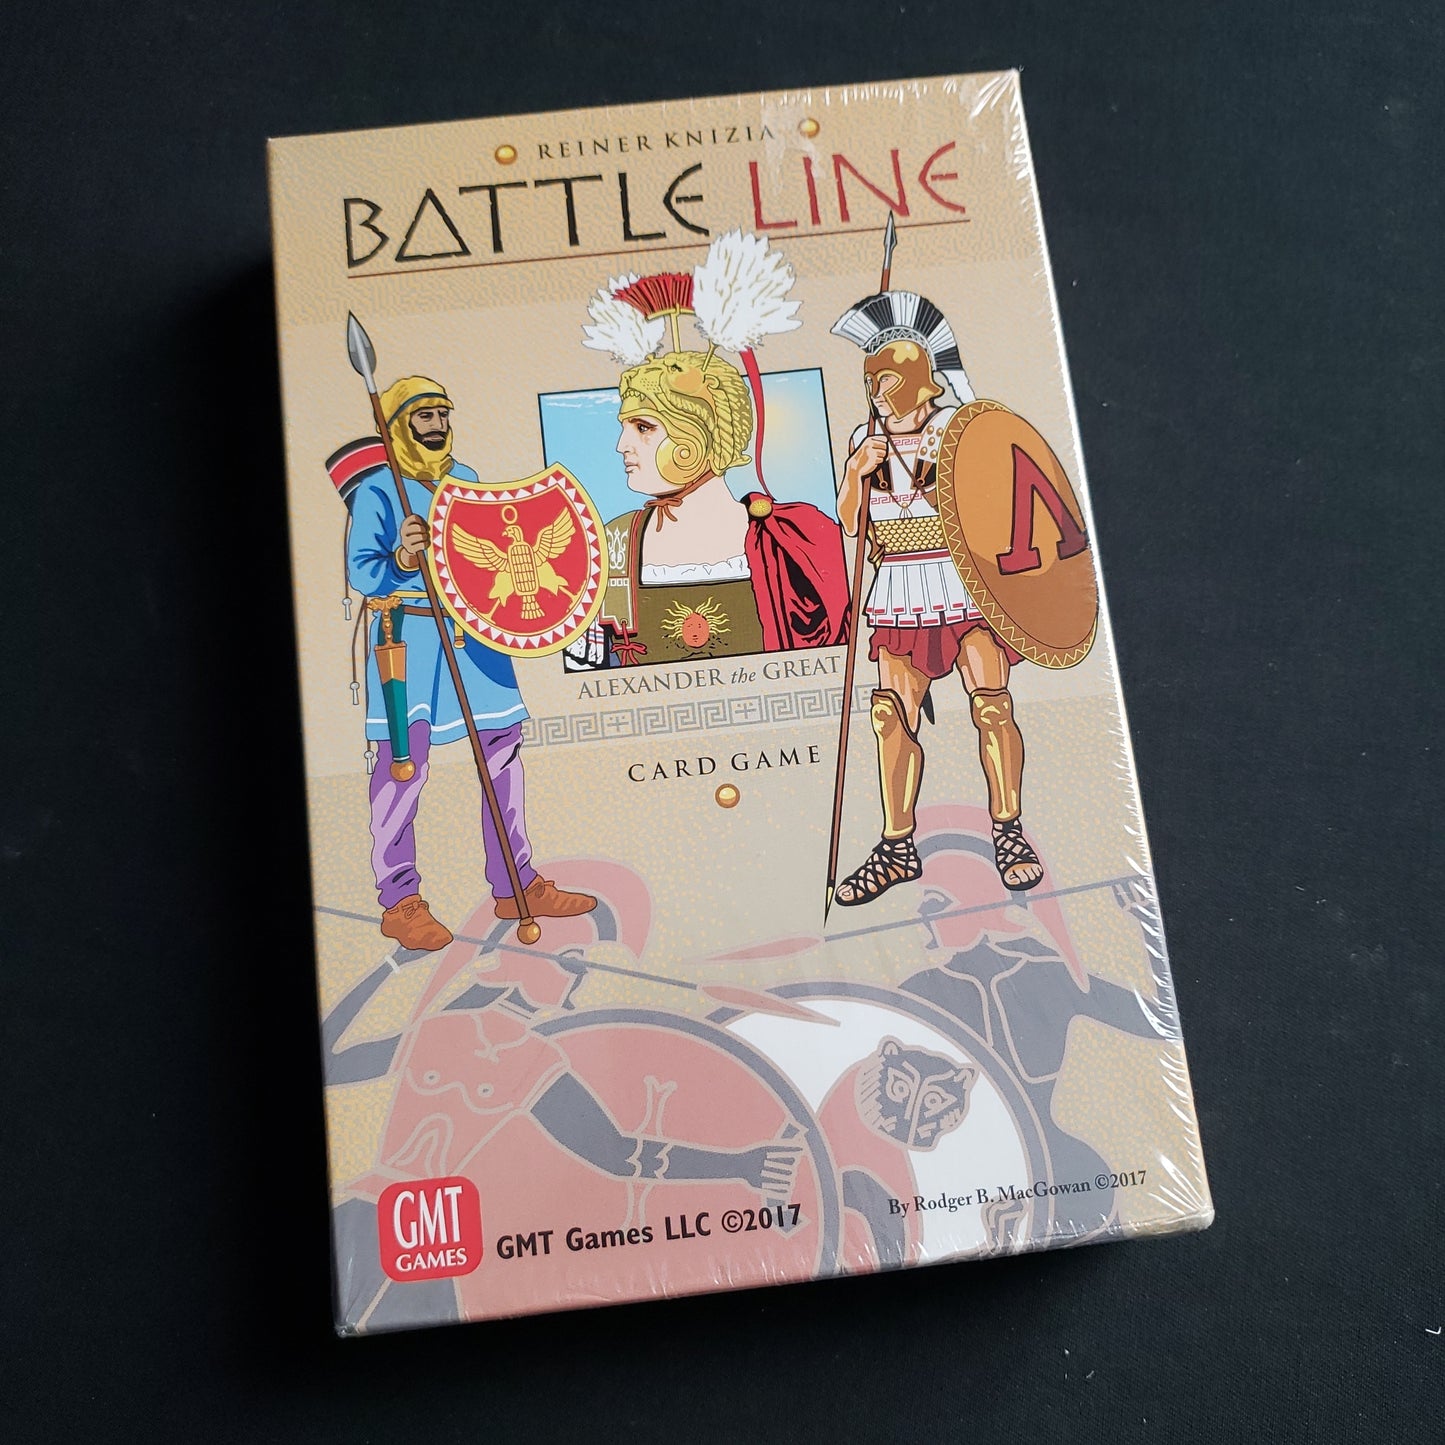 Image shows the front cover of the box of the Battle Line card game